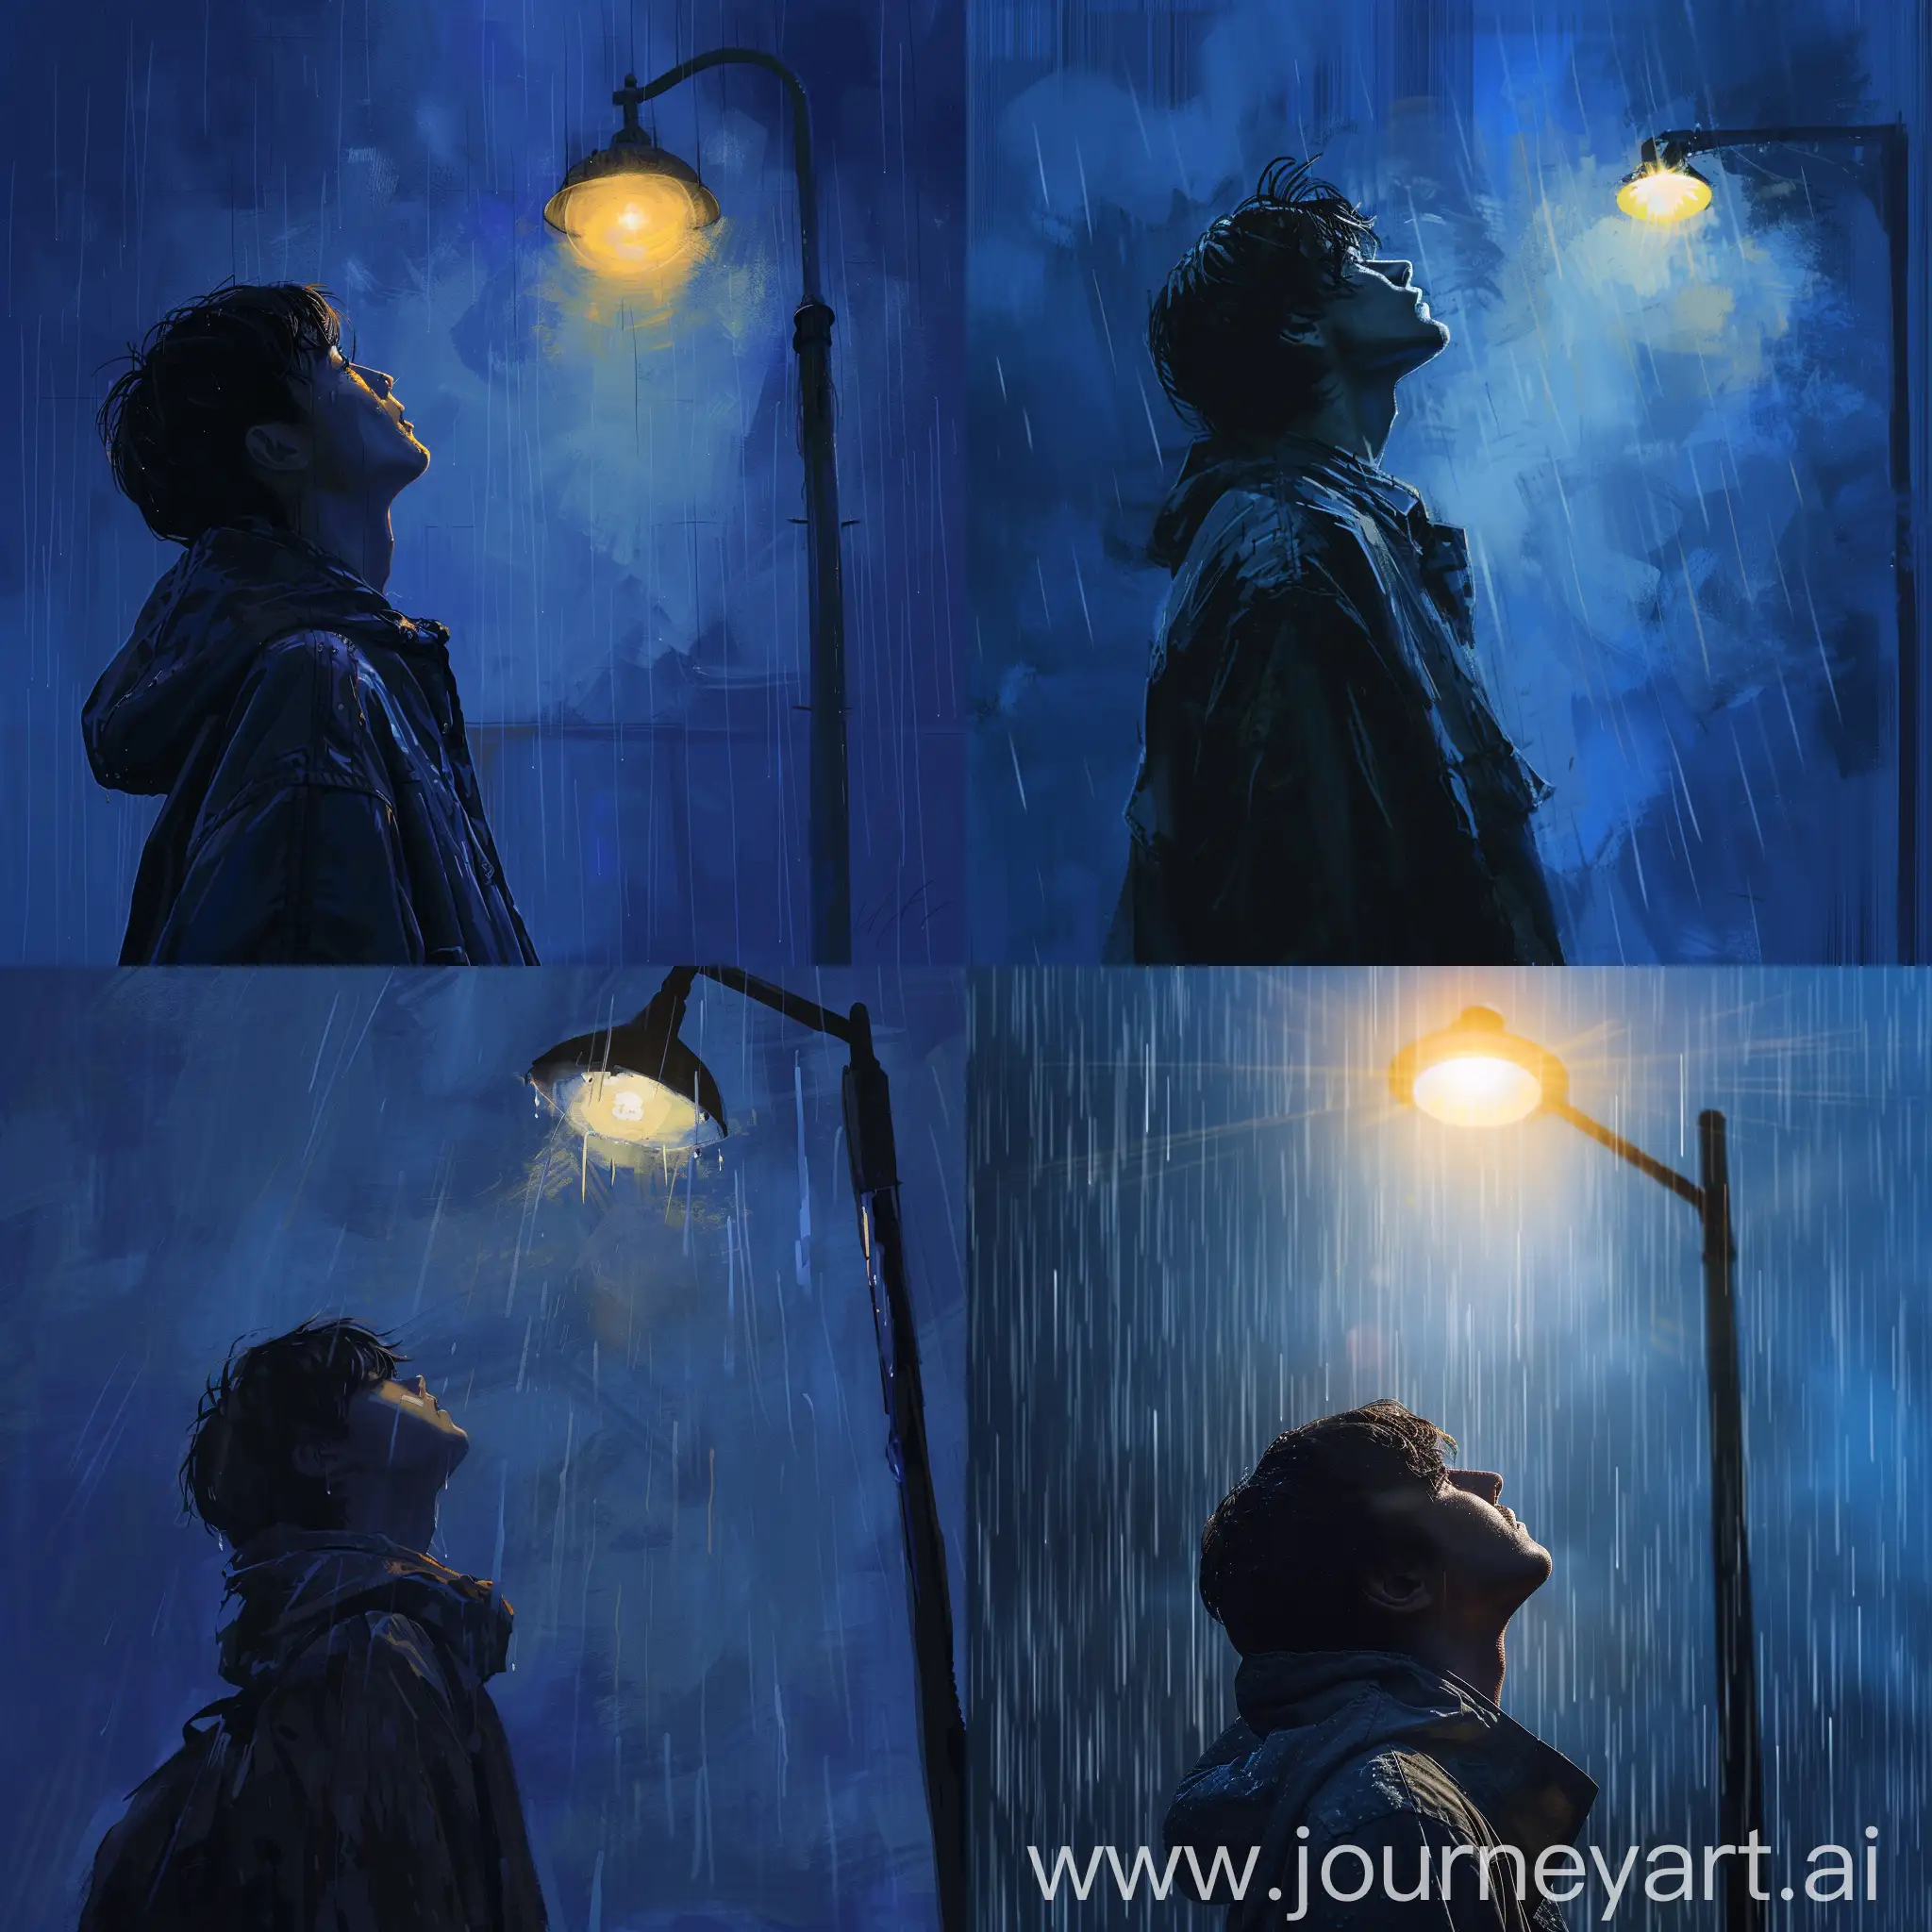 guy is standing in the rain, raised his head up and looks at the sky. the sky is dark blue, the light from the street lamp shines brightly on the guy’s face. the guy is wearing an oversized jacket.